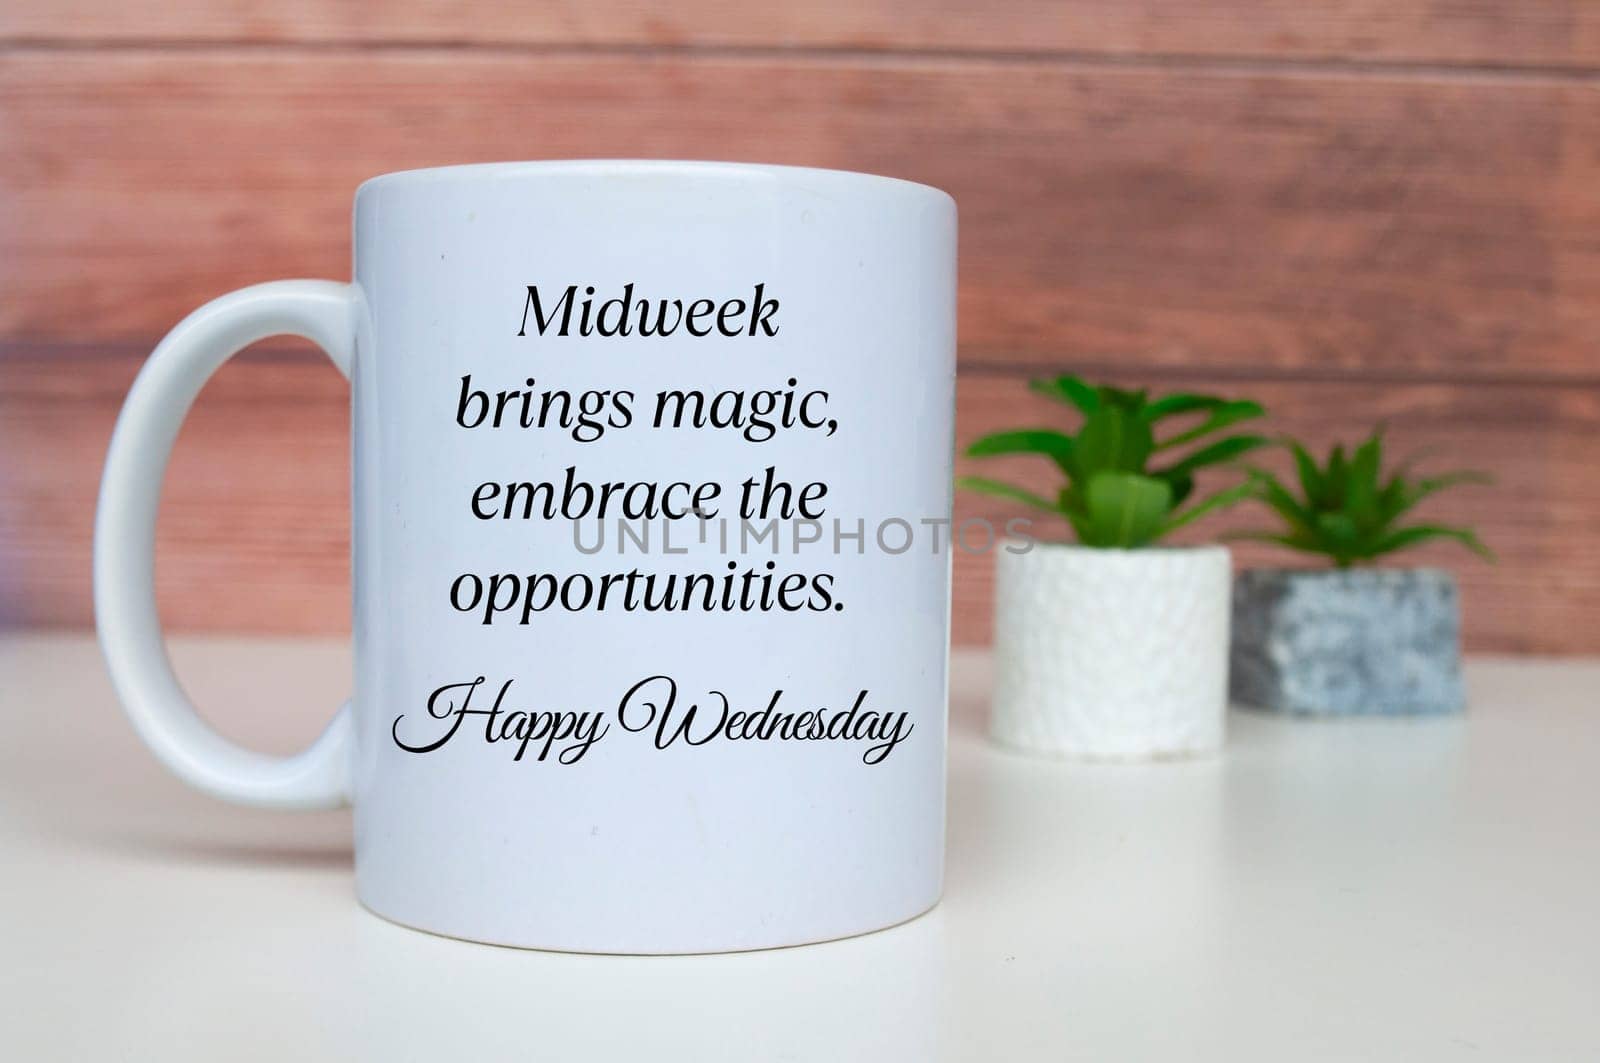 Midweek brings magic, embrace the opportunities. Happy Wednesday. Morning greetings concept by yom98